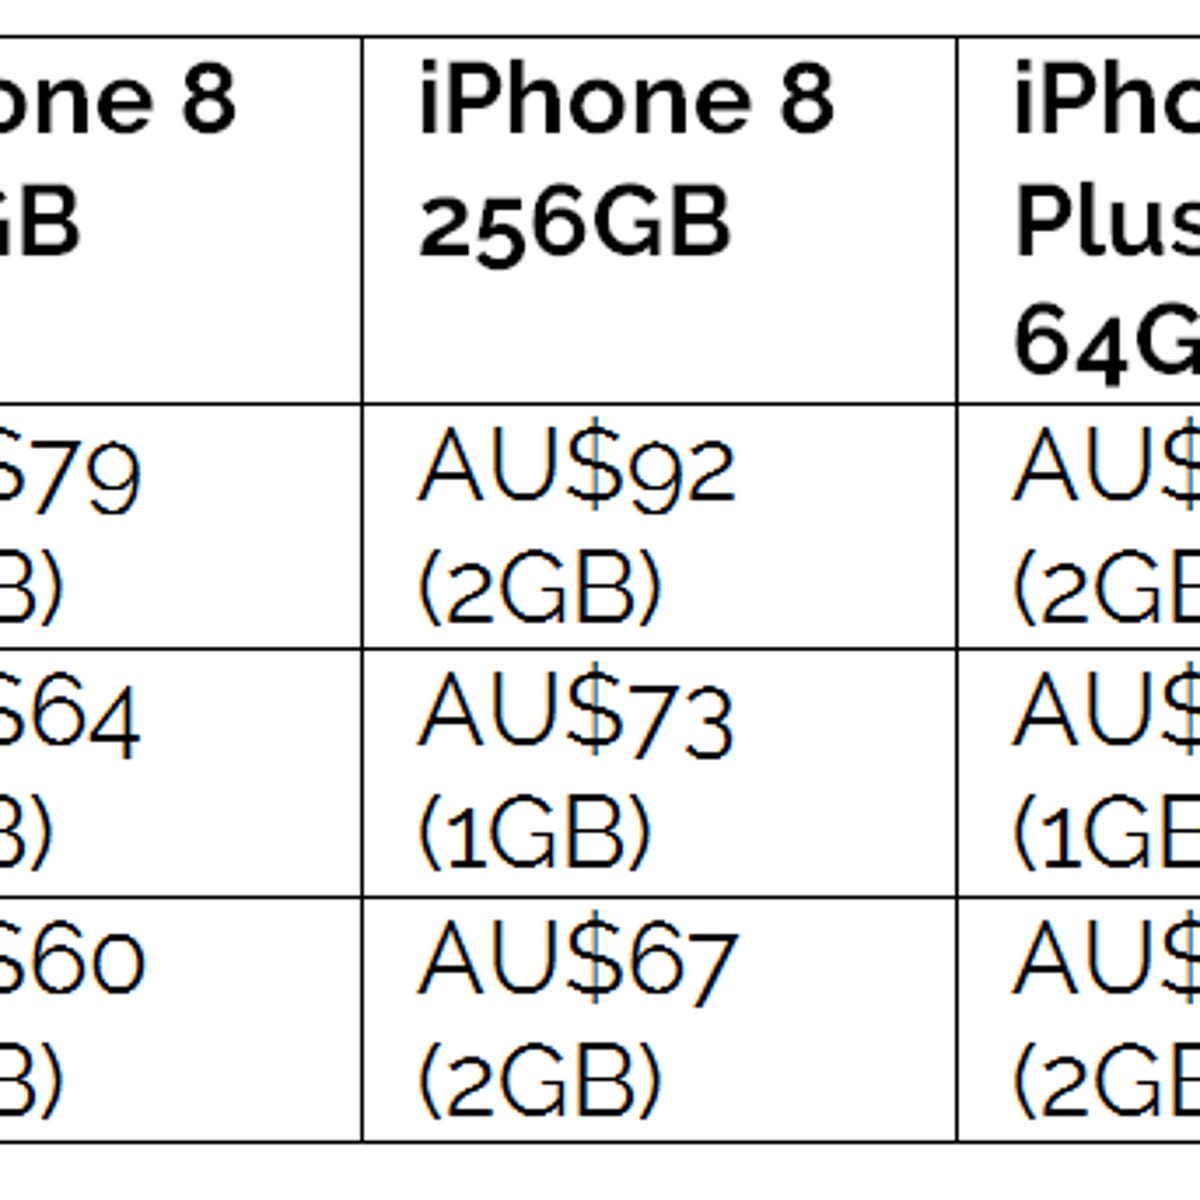 iPhone 8 and 8 Plus Australian pricing | ZDNET